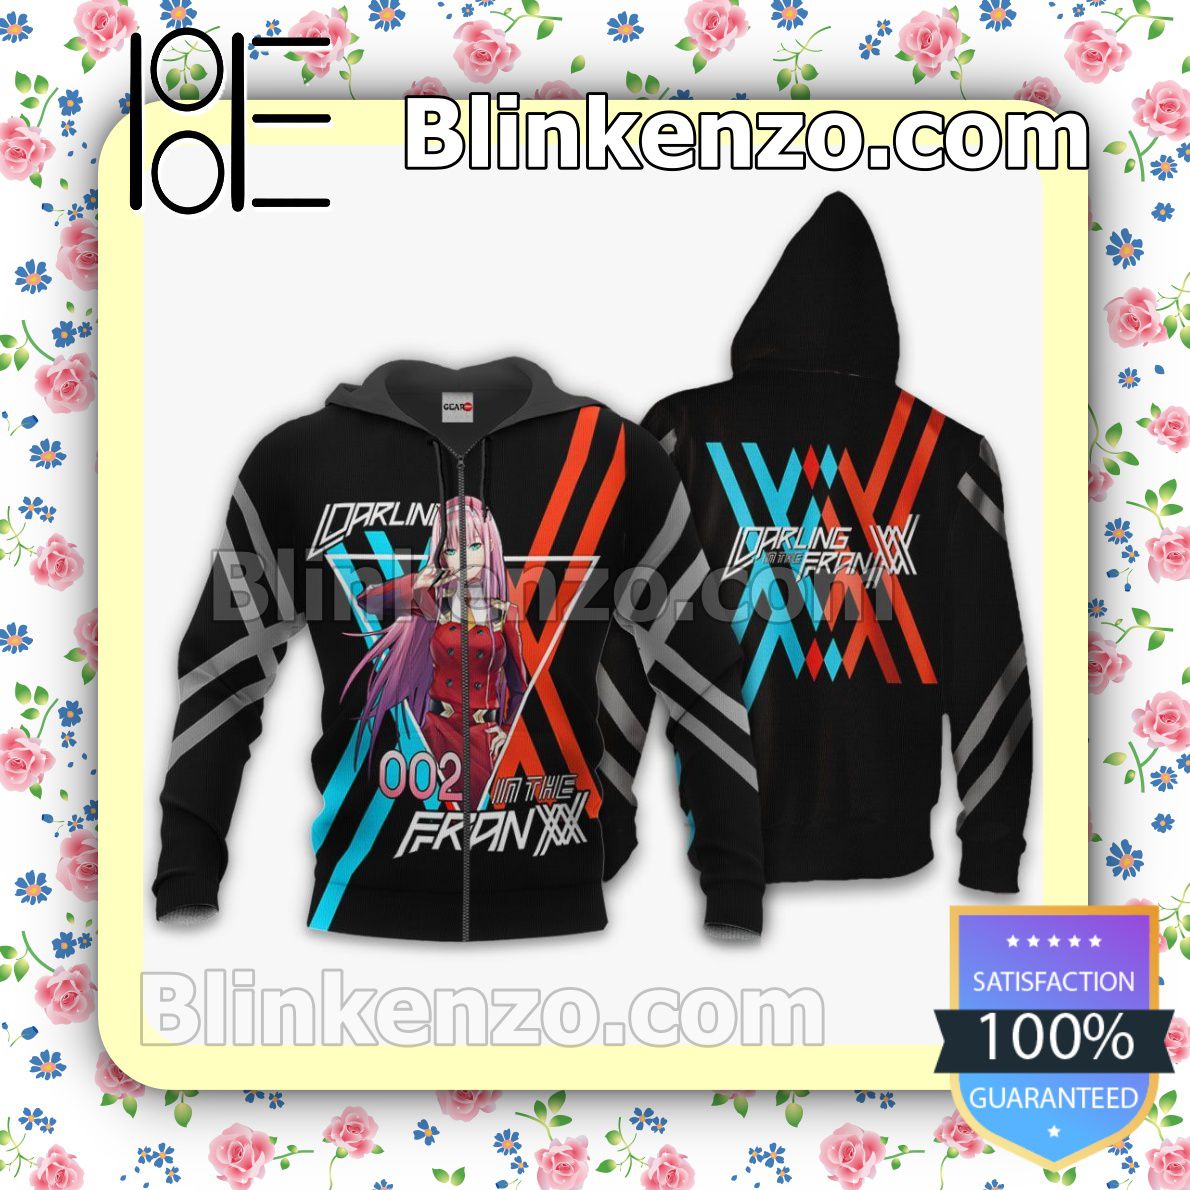 Code 002 Zero Two Darling In The Franxx Anime Personalized T-shirt, Hoodie, Long Sleeve, Bomber Jacket